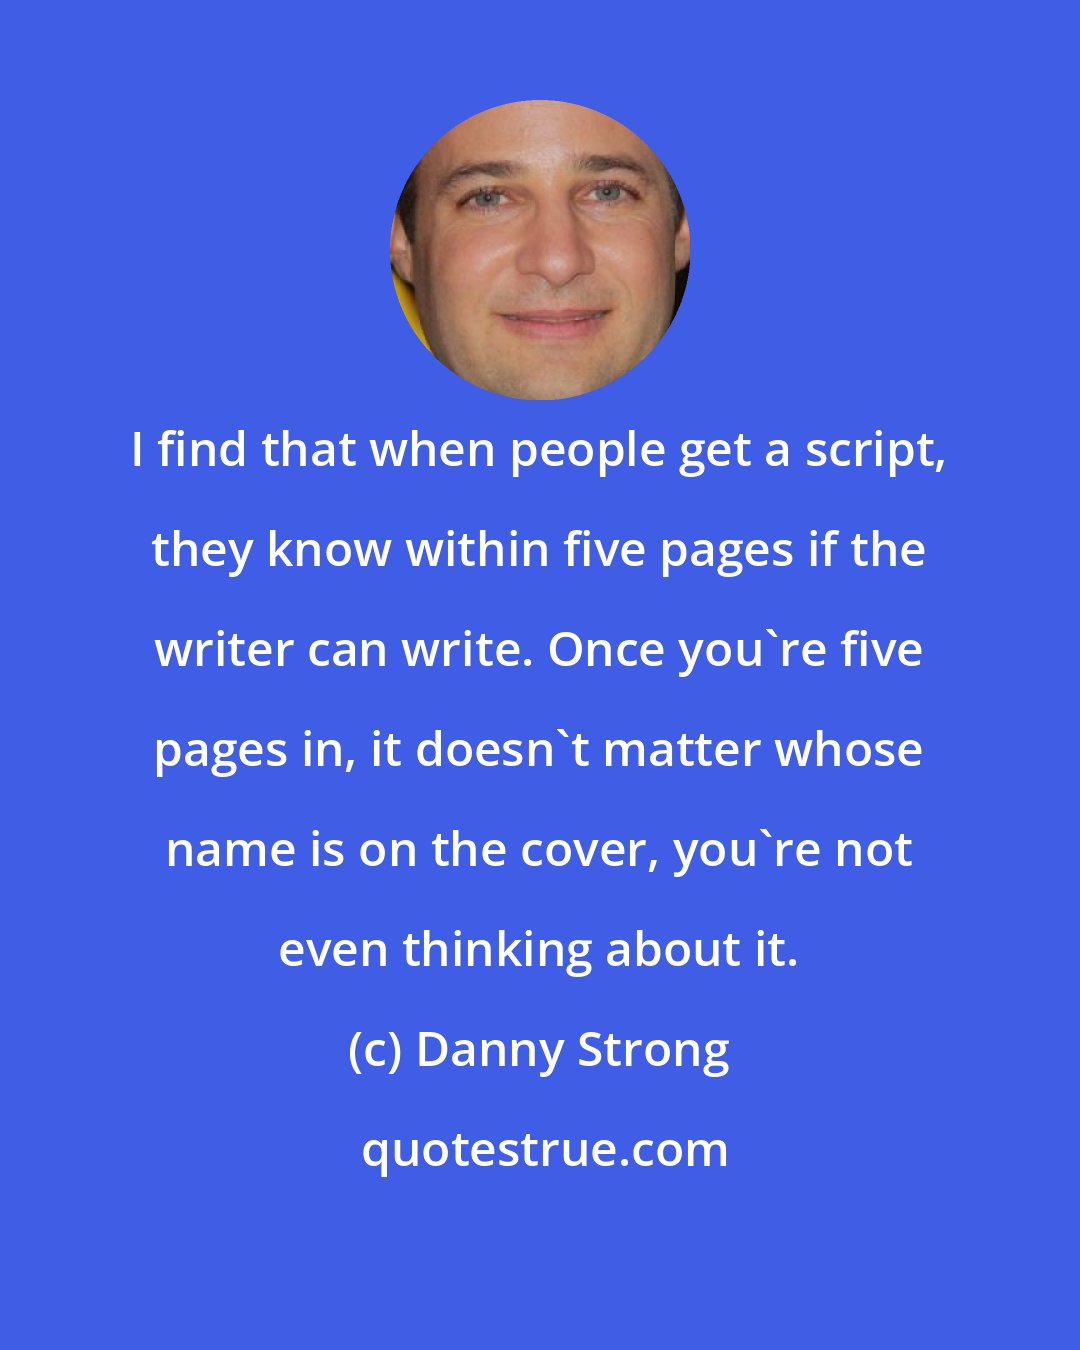 Danny Strong: I find that when people get a script, they know within five pages if the writer can write. Once you're five pages in, it doesn't matter whose name is on the cover, you're not even thinking about it.